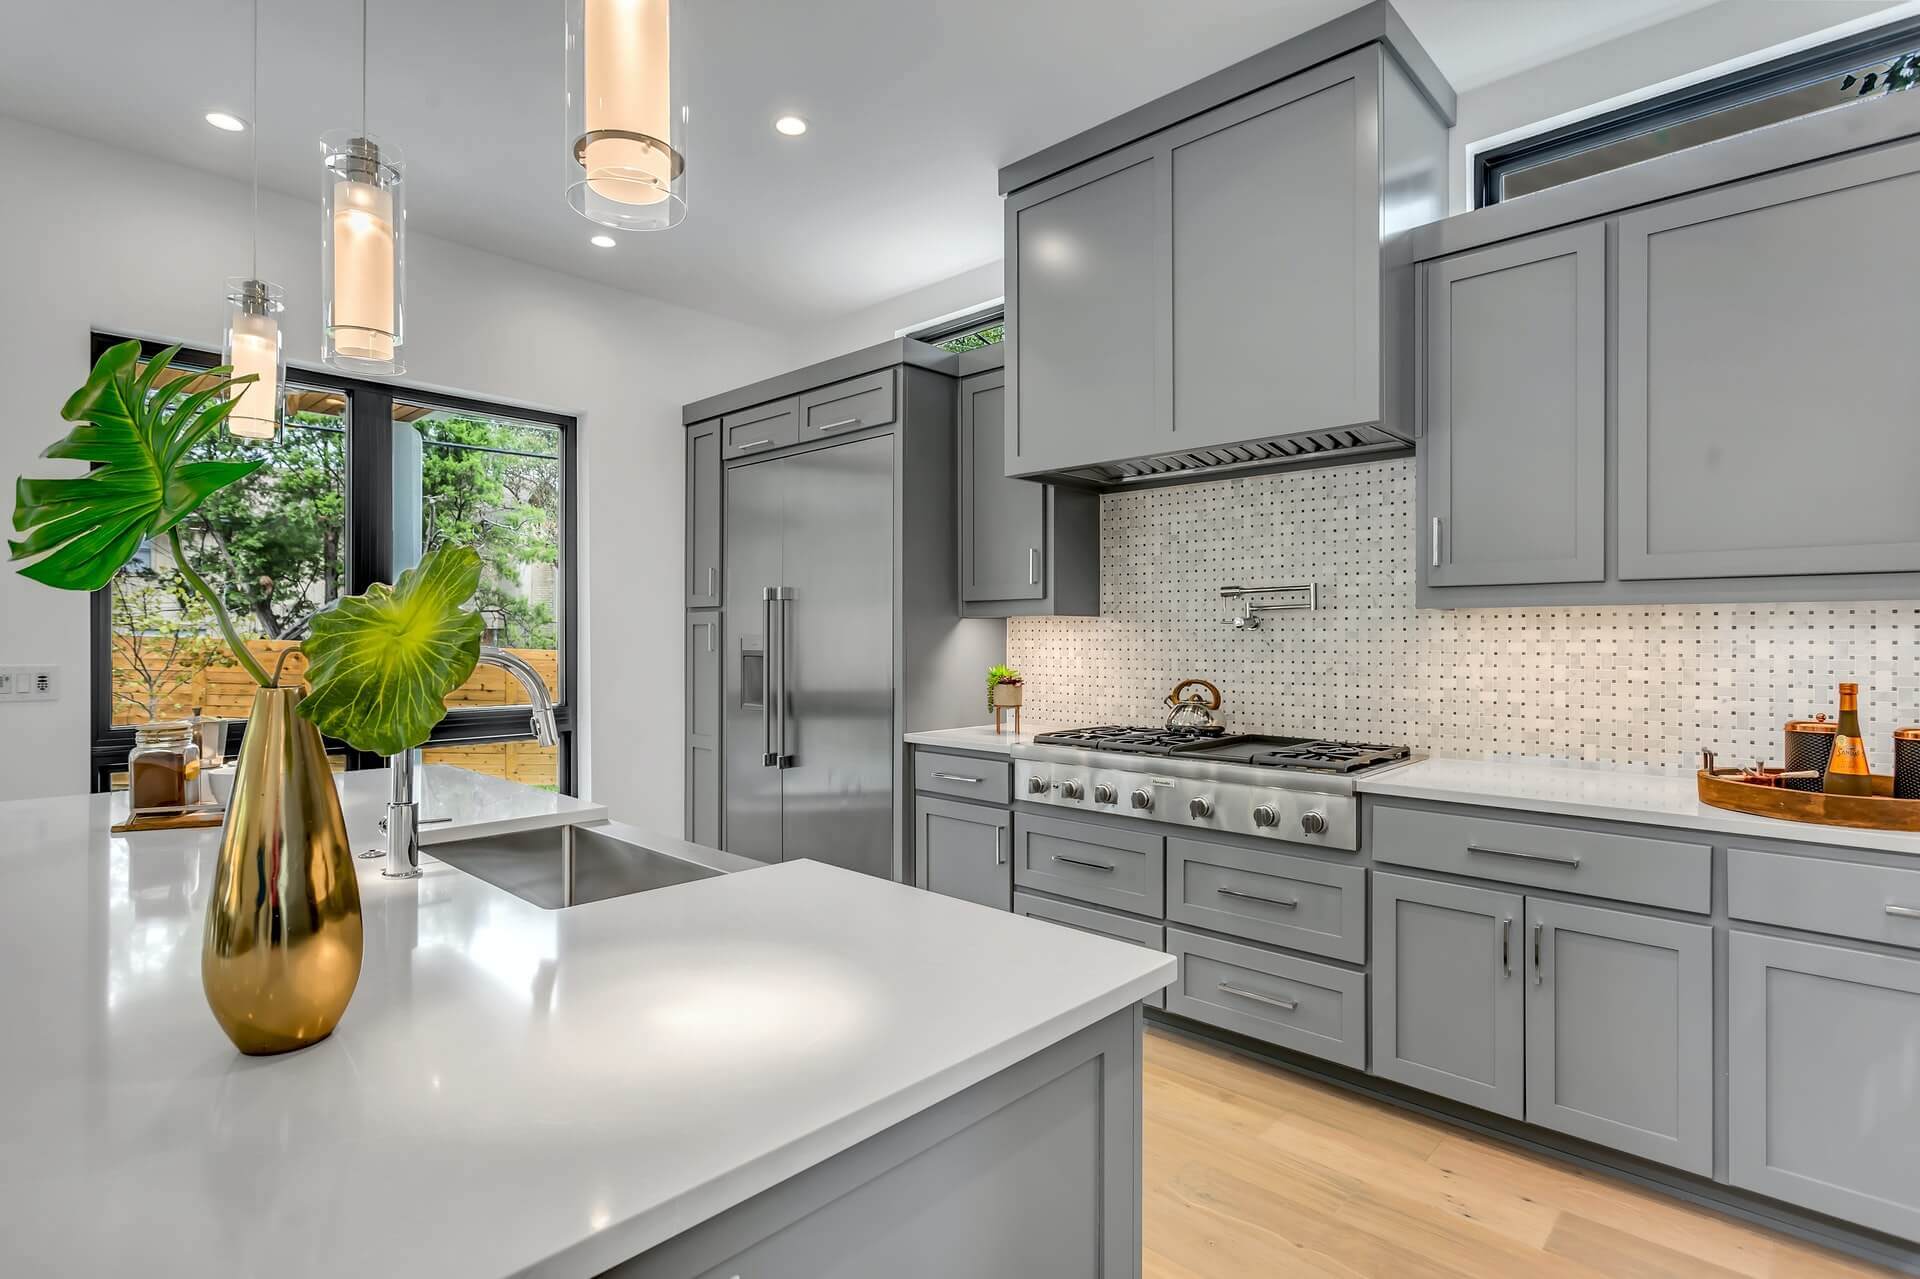 Gray cabinets with stainless steel appliances in this beautiful modern kitchen remodel